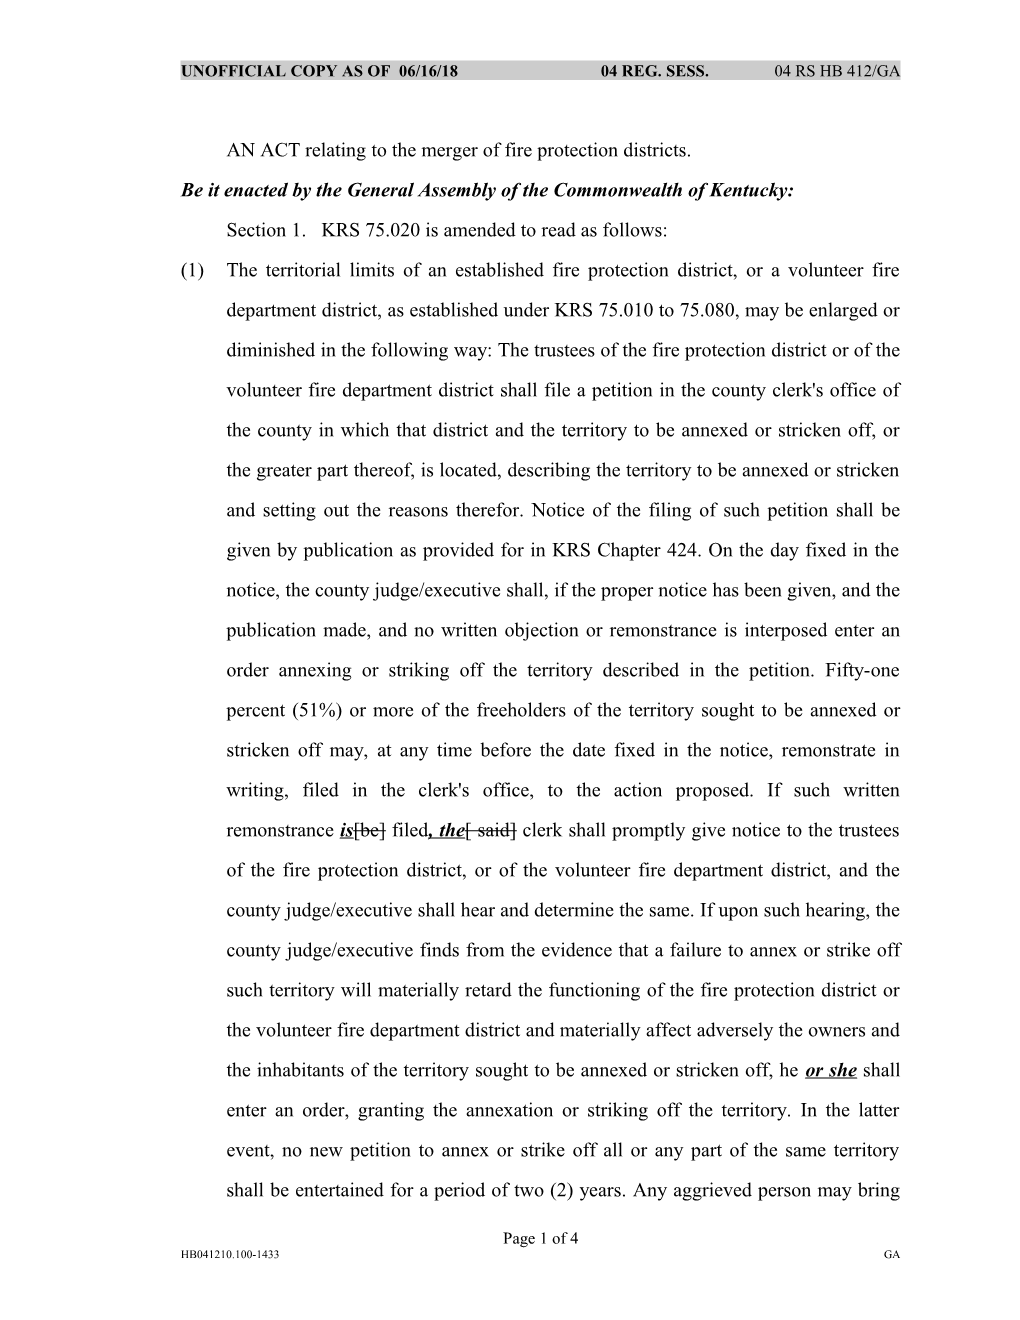 AN ACT Relating to the Merger of Fire Protection Districts